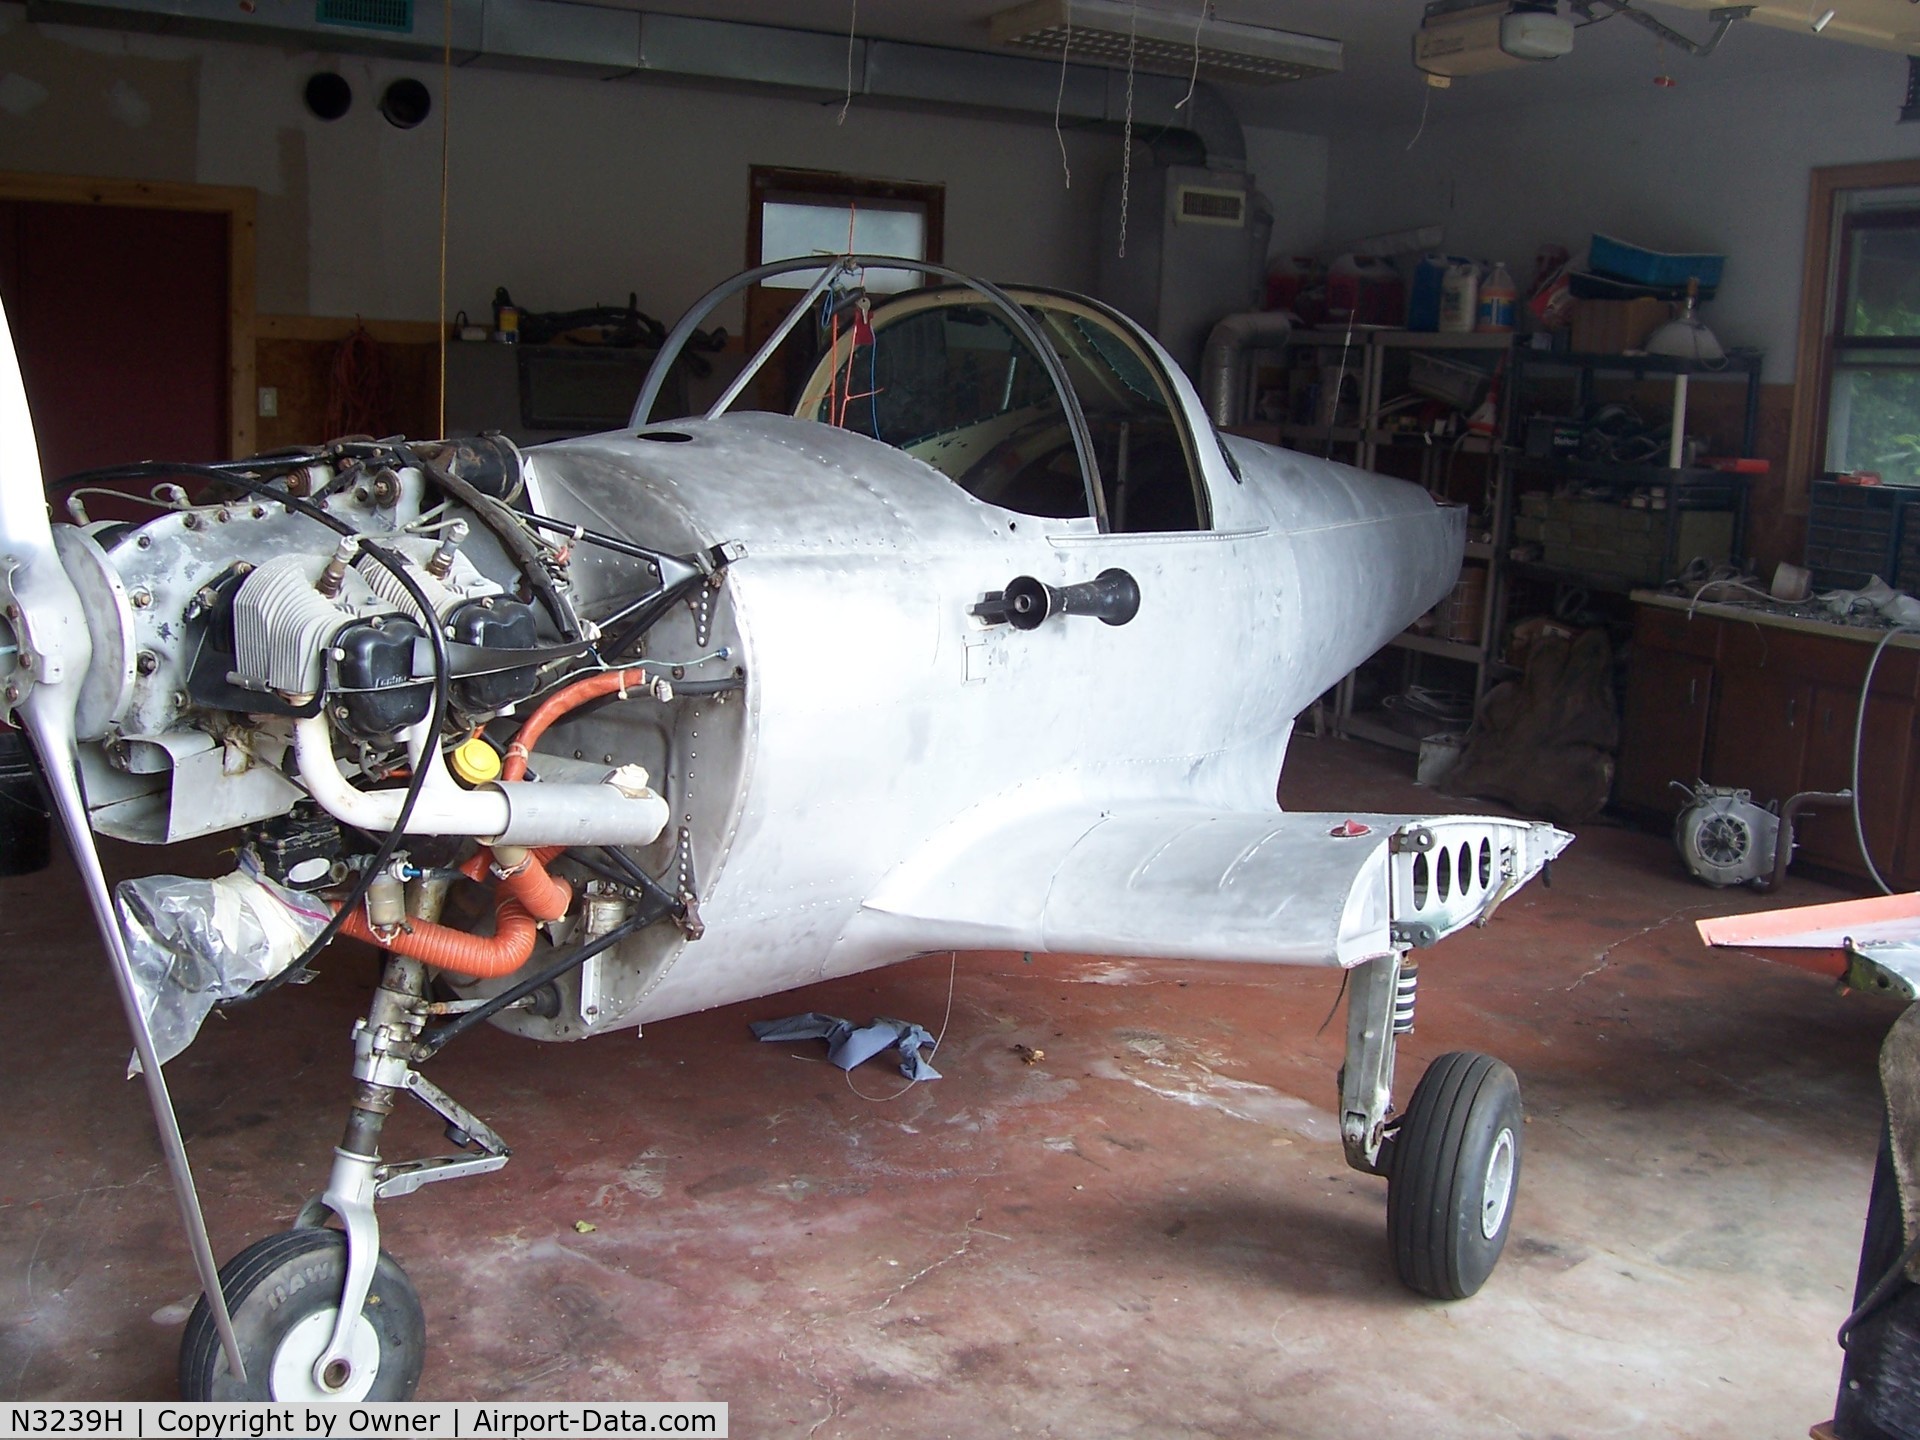 N3239H, 1946 Erco 415C Ercoupe C/N 3864, N3239h getting ready for paint